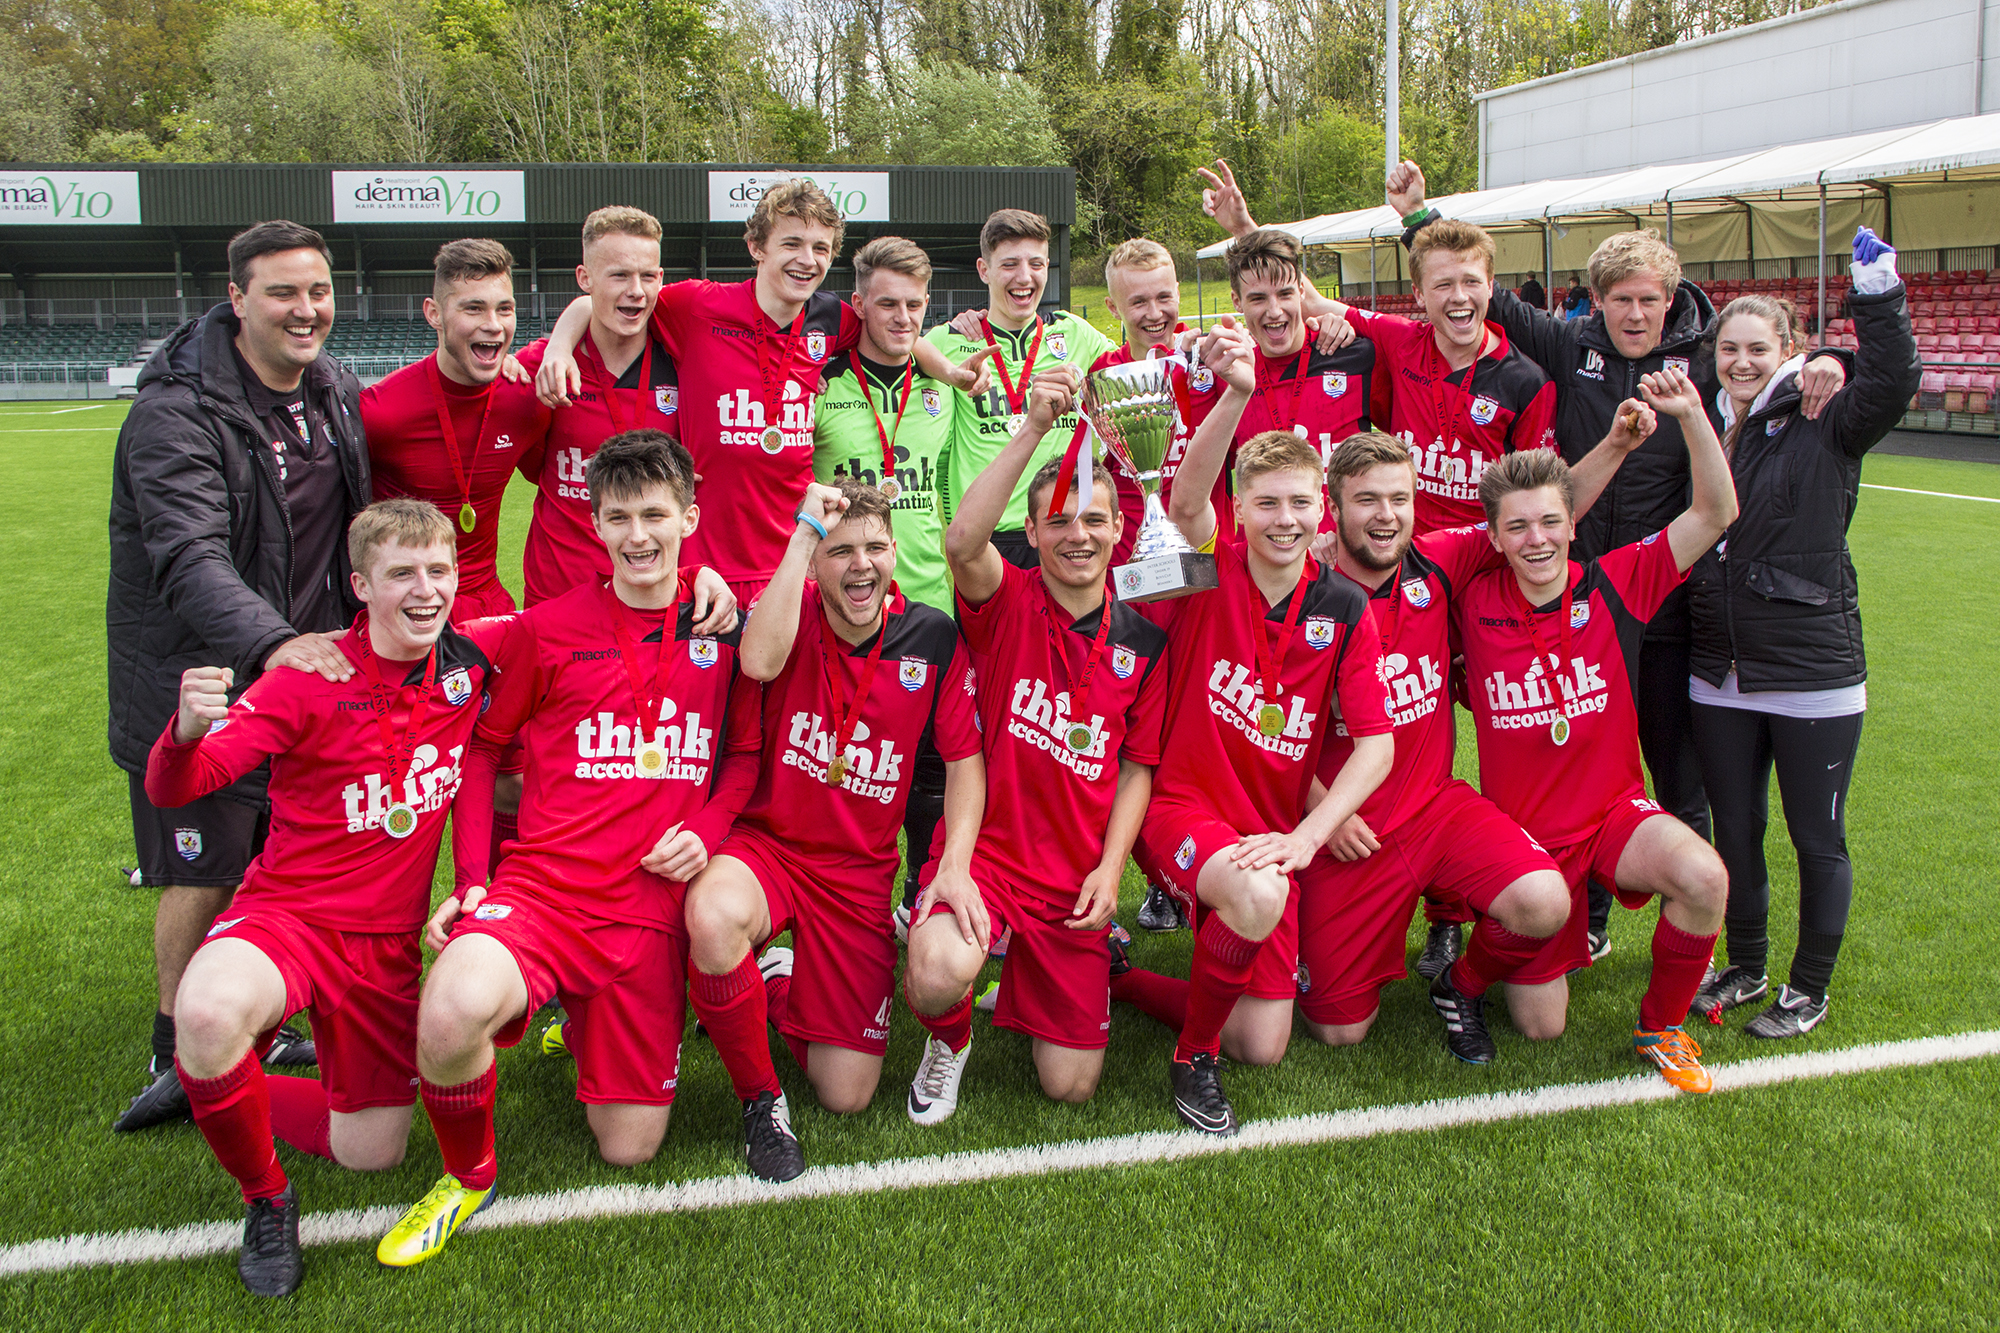 Davies was part of our first ever Scholarship team that won the Welsh Schools FA U19 Cup in 2015 with a victory over Treorchy in the final at Park Hall